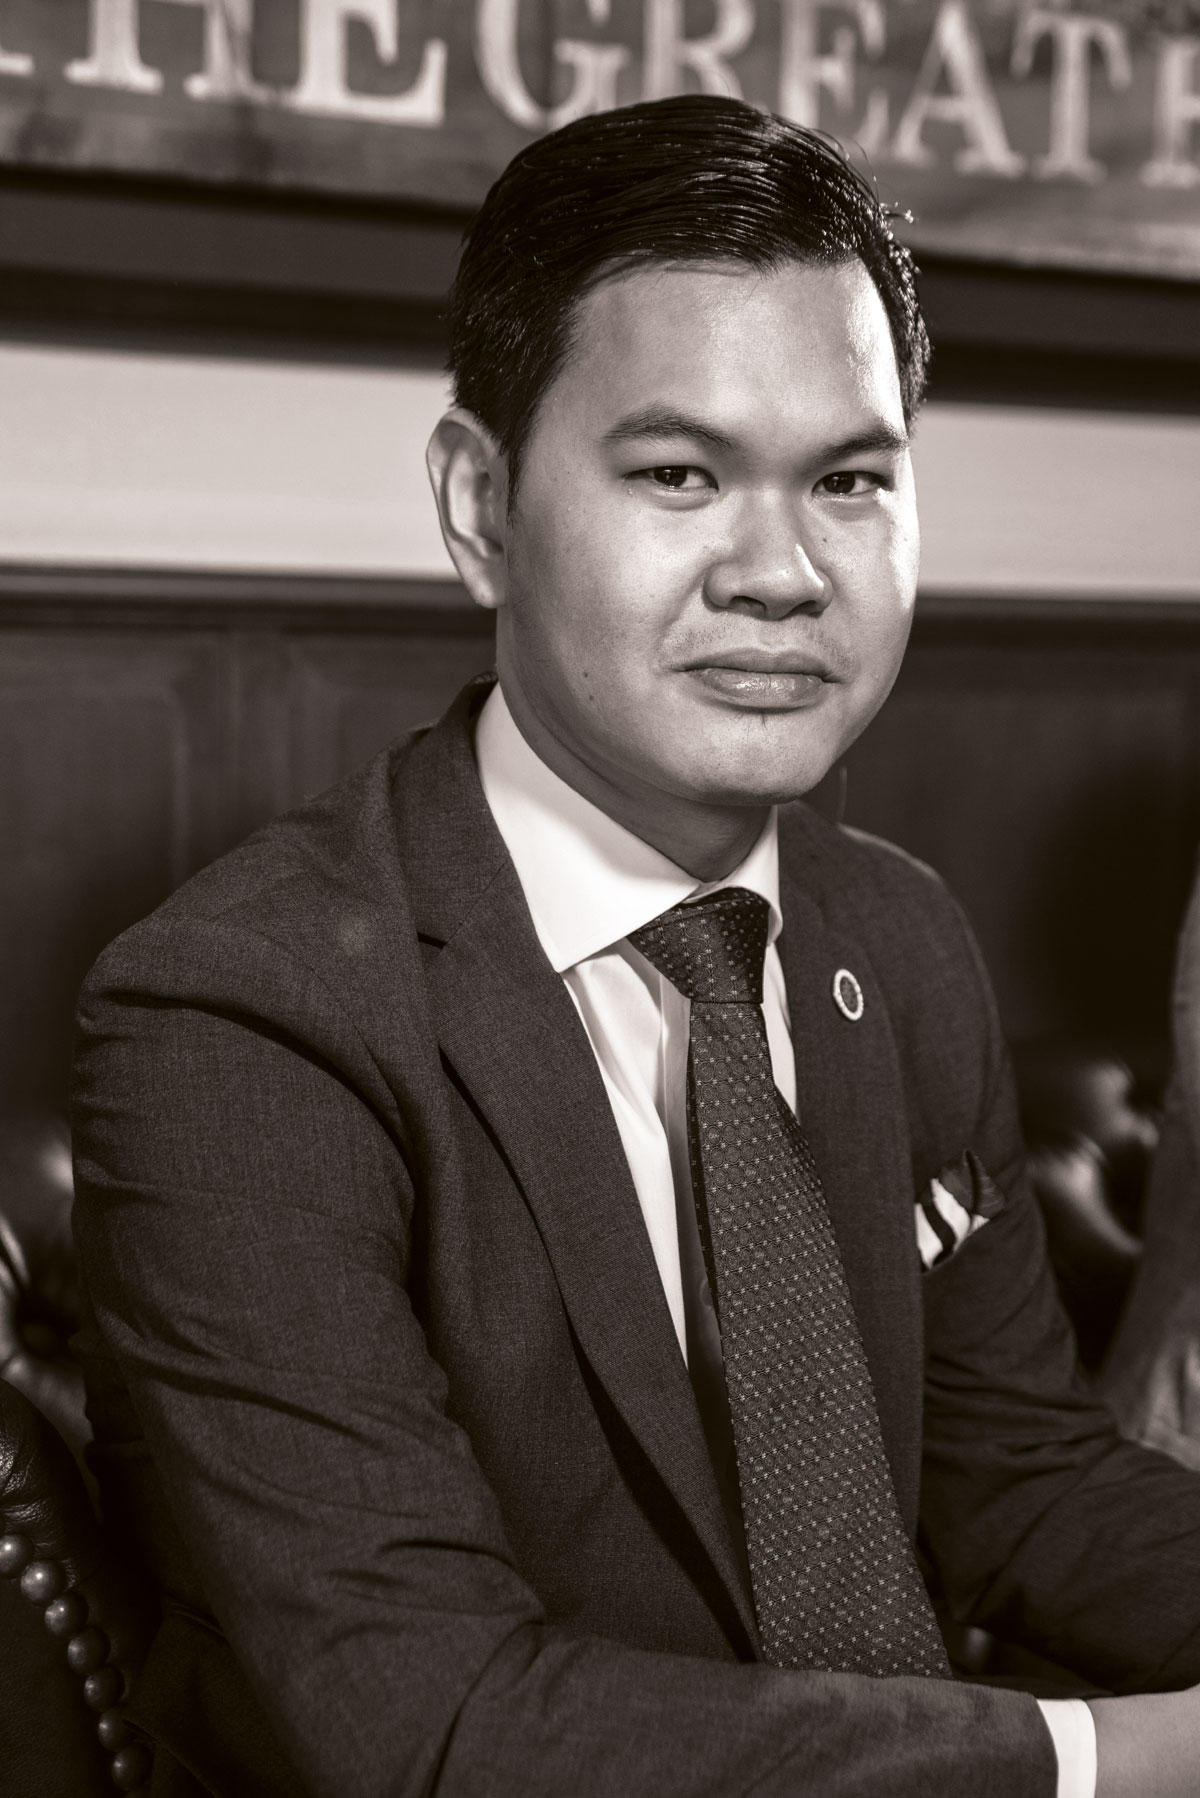 Rey Moraga is the concierge and duty manager of Raffles and Fairmont Hotels